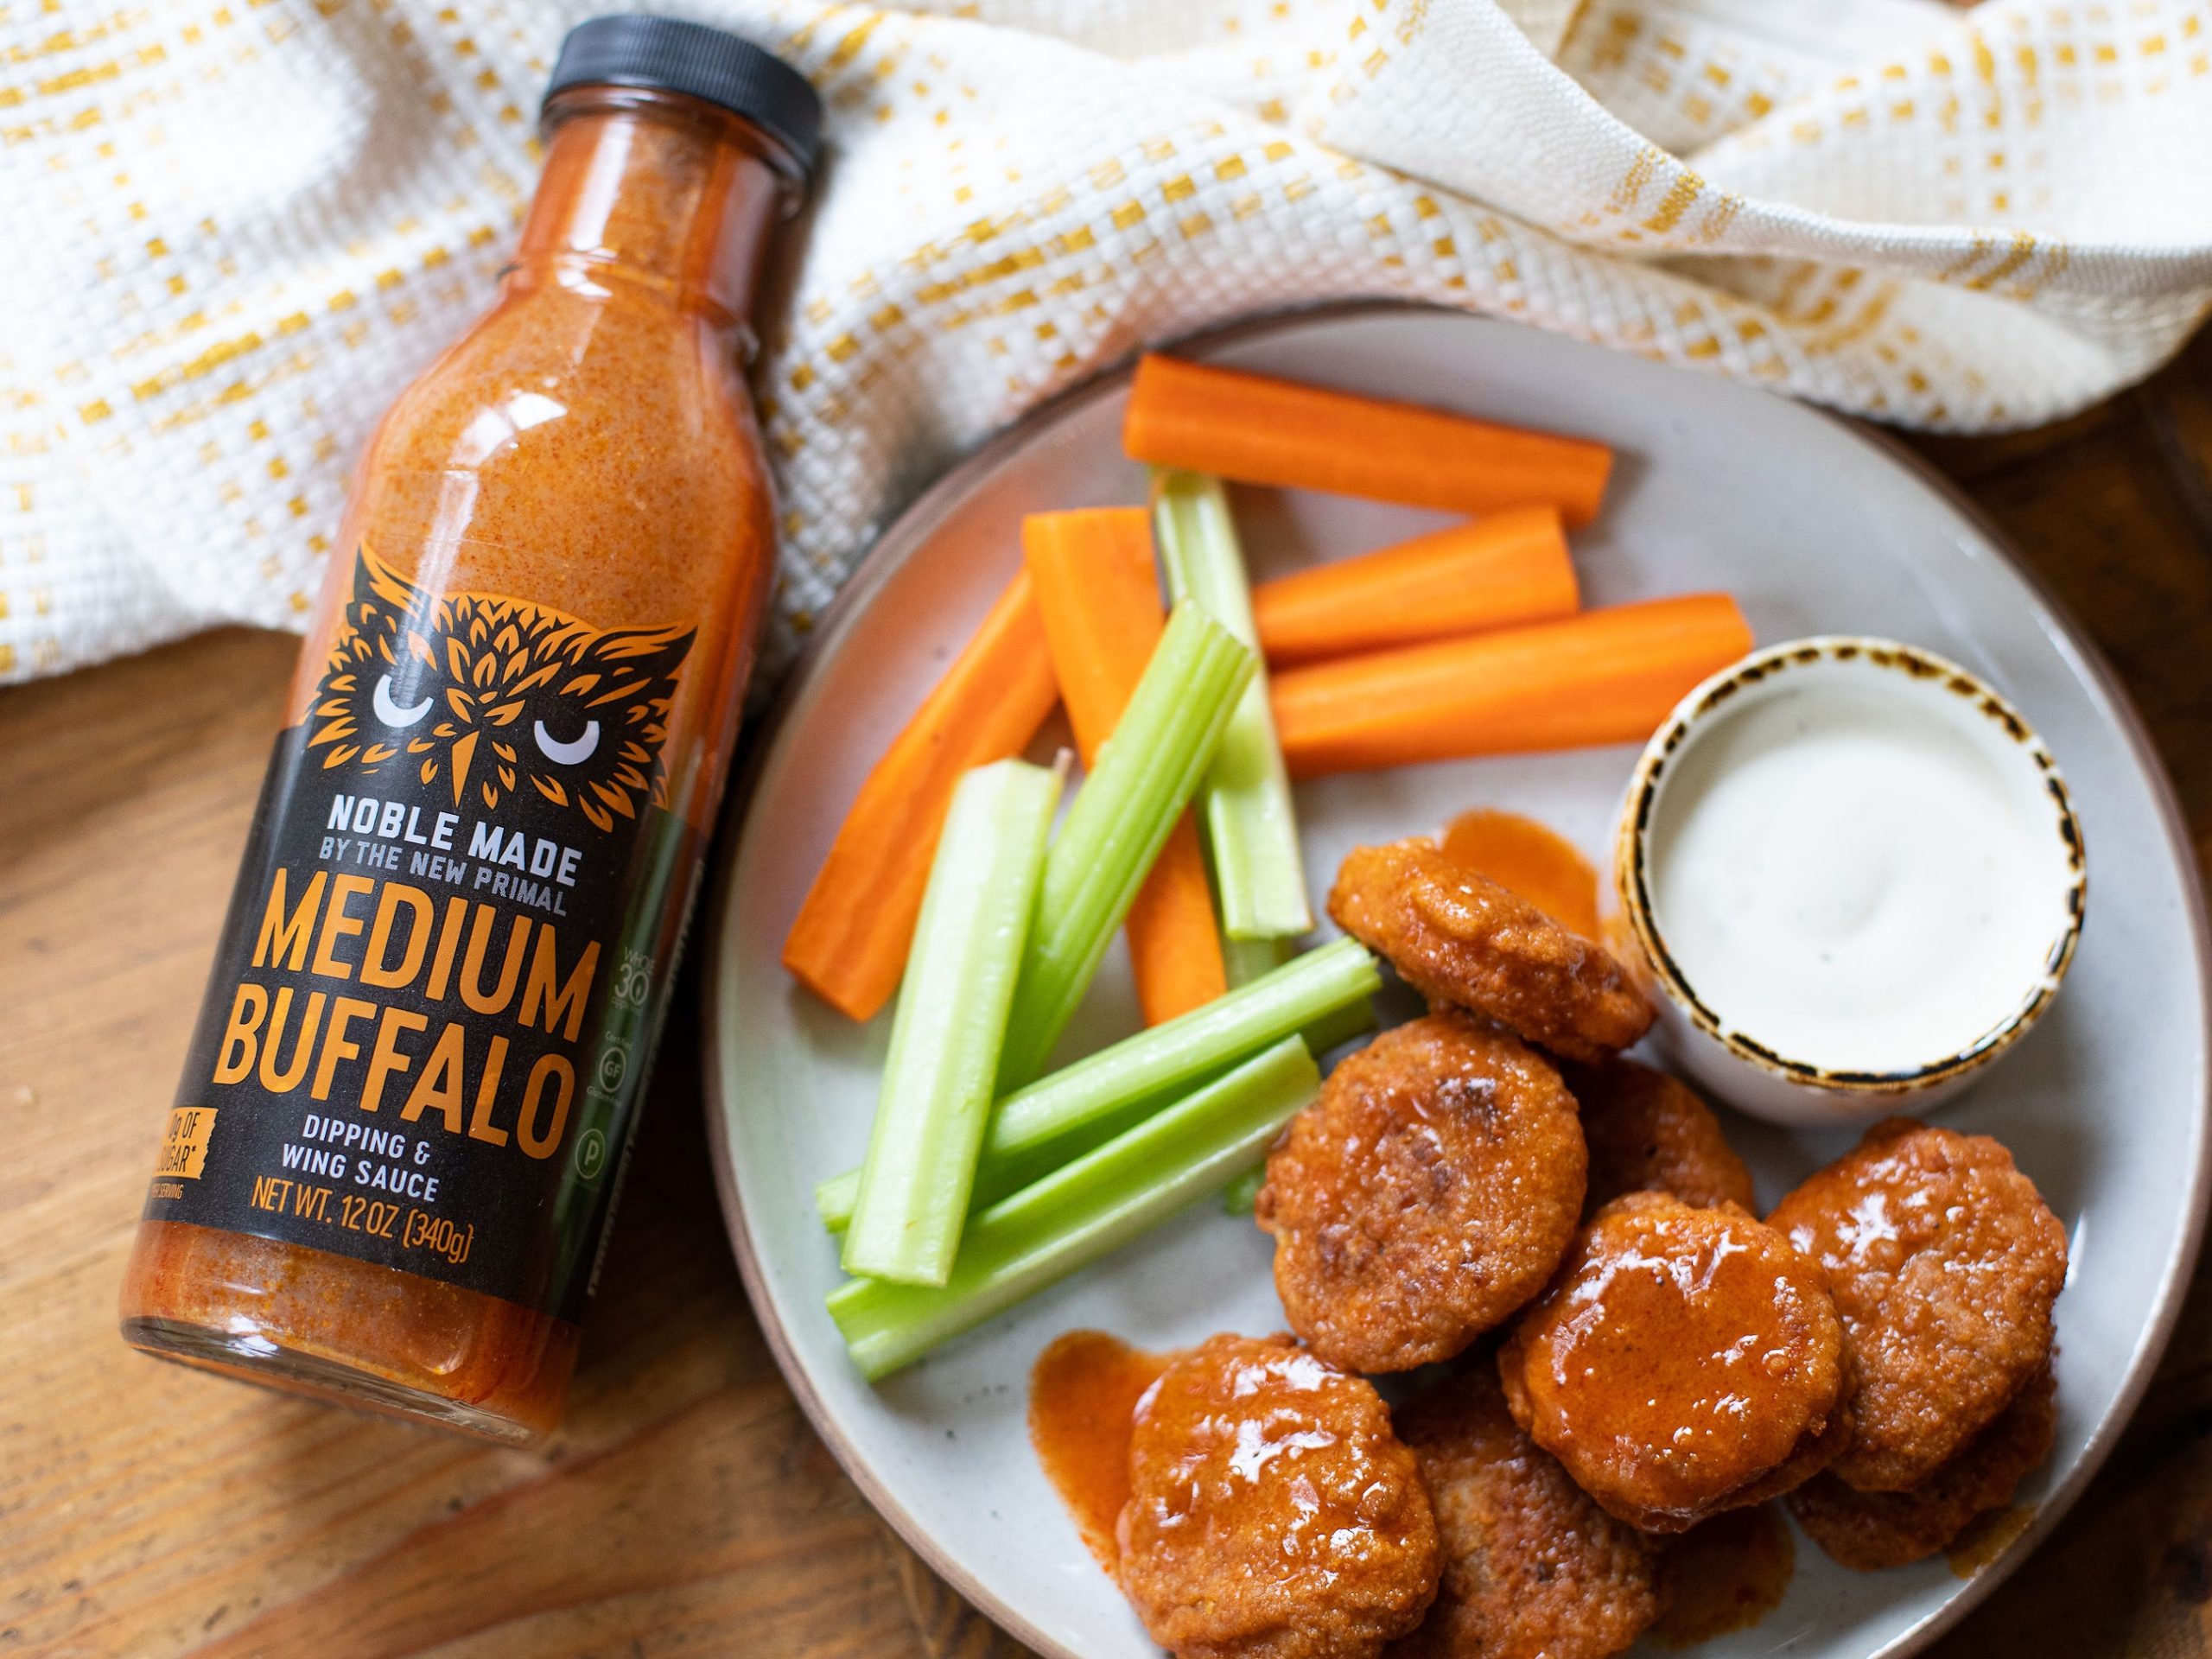 Noble Made by the New Primal Buffalo Dipping & Wing Sauce Just $5 At Publix – Save Over $2 Per Bottle